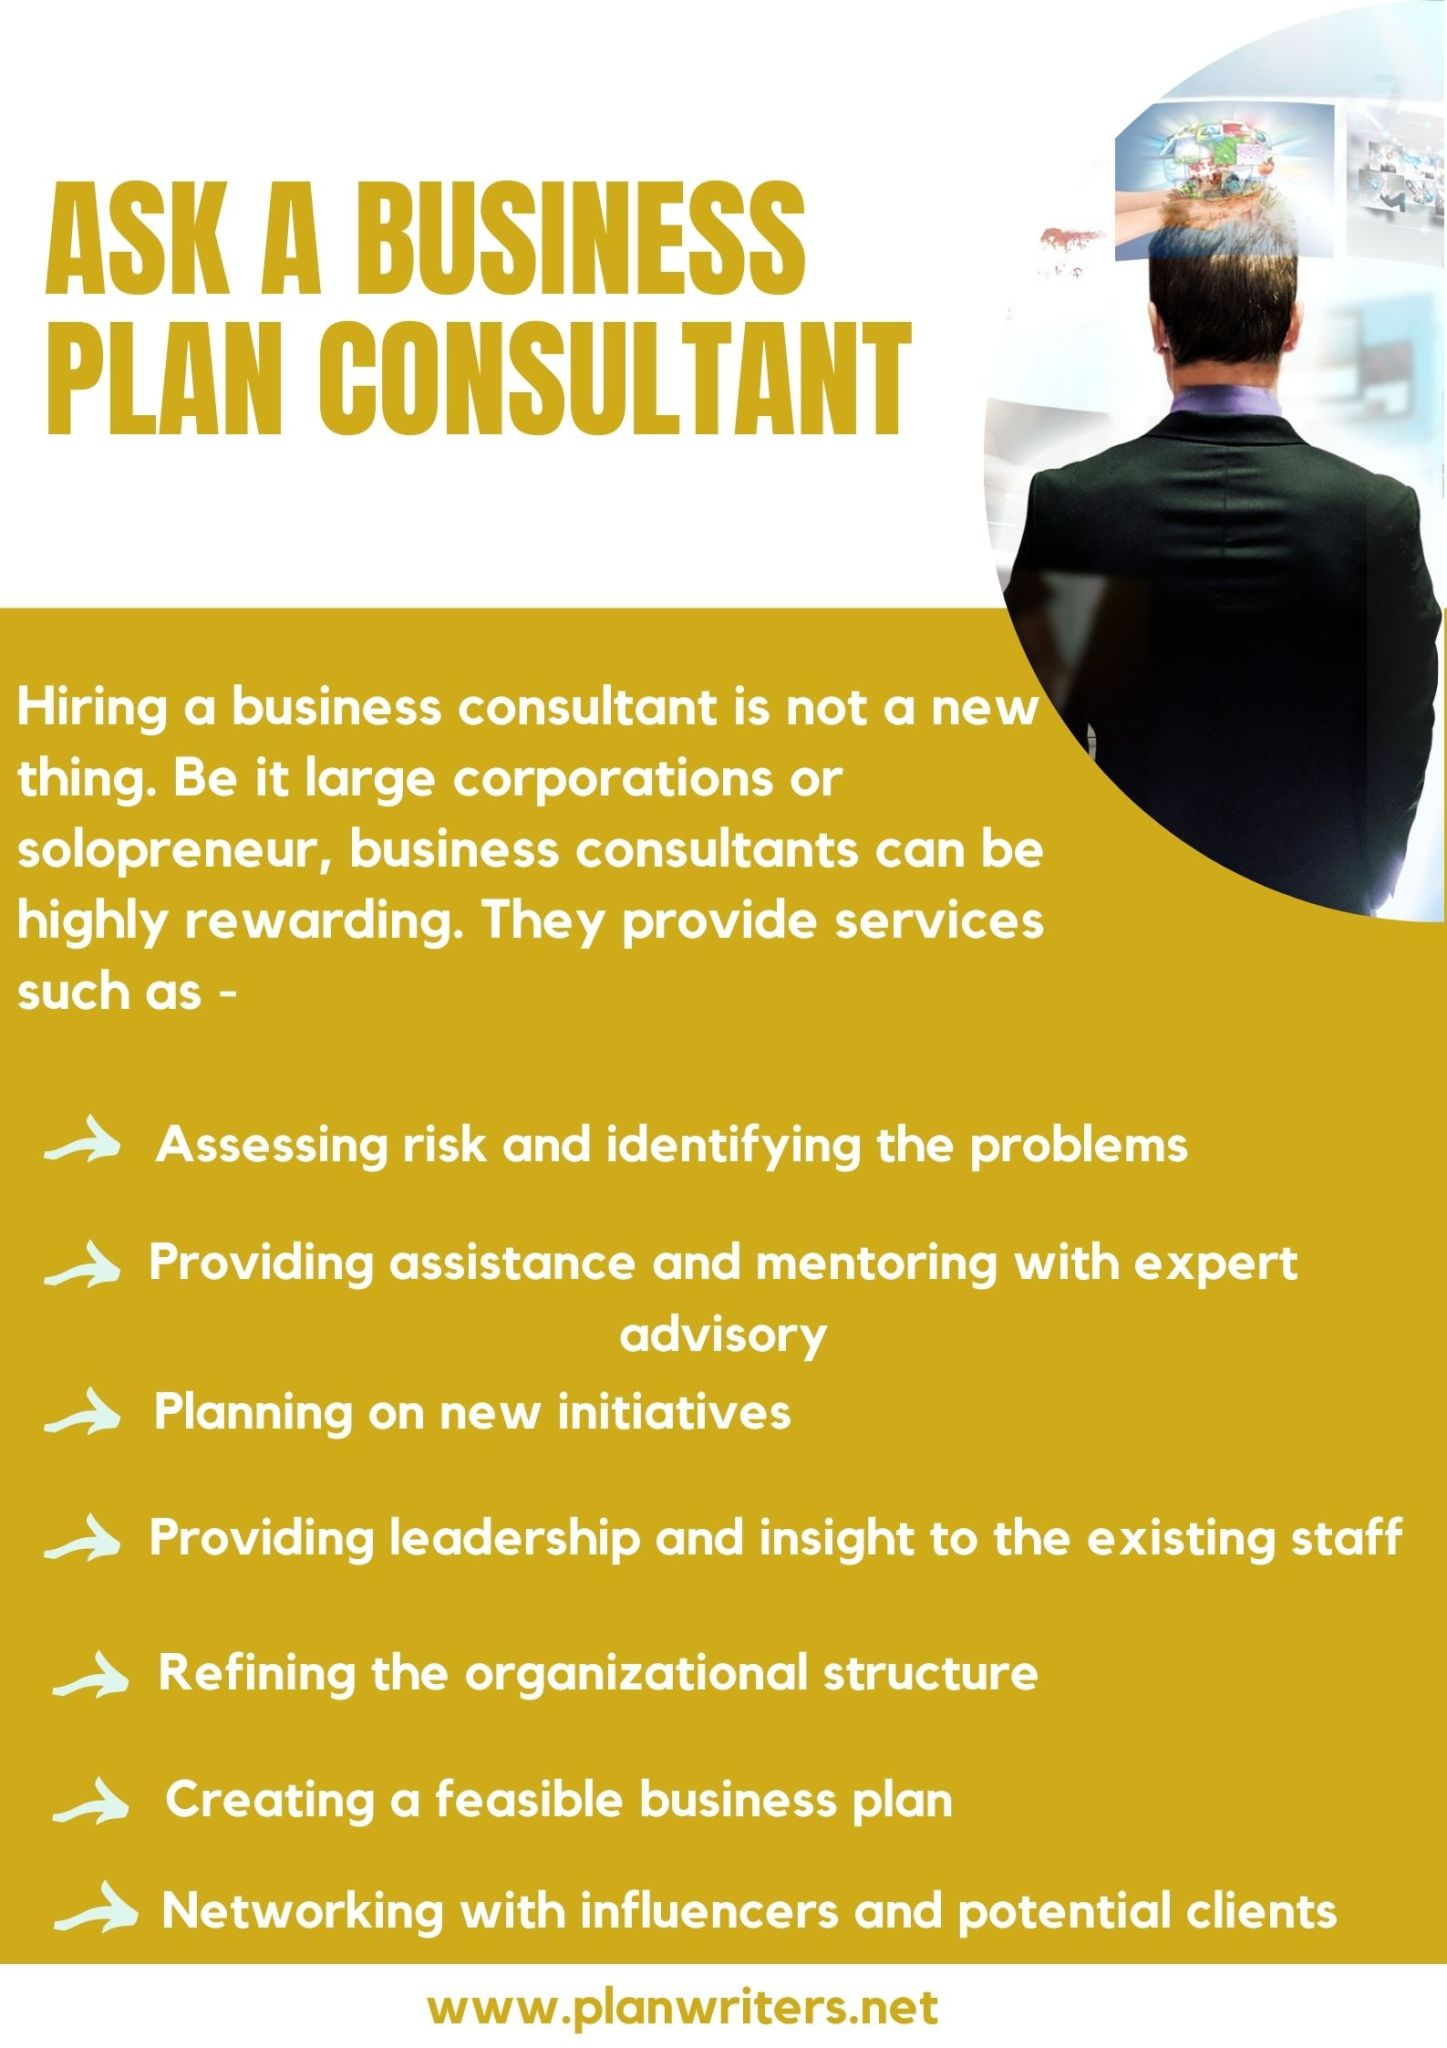 a business plan consultant